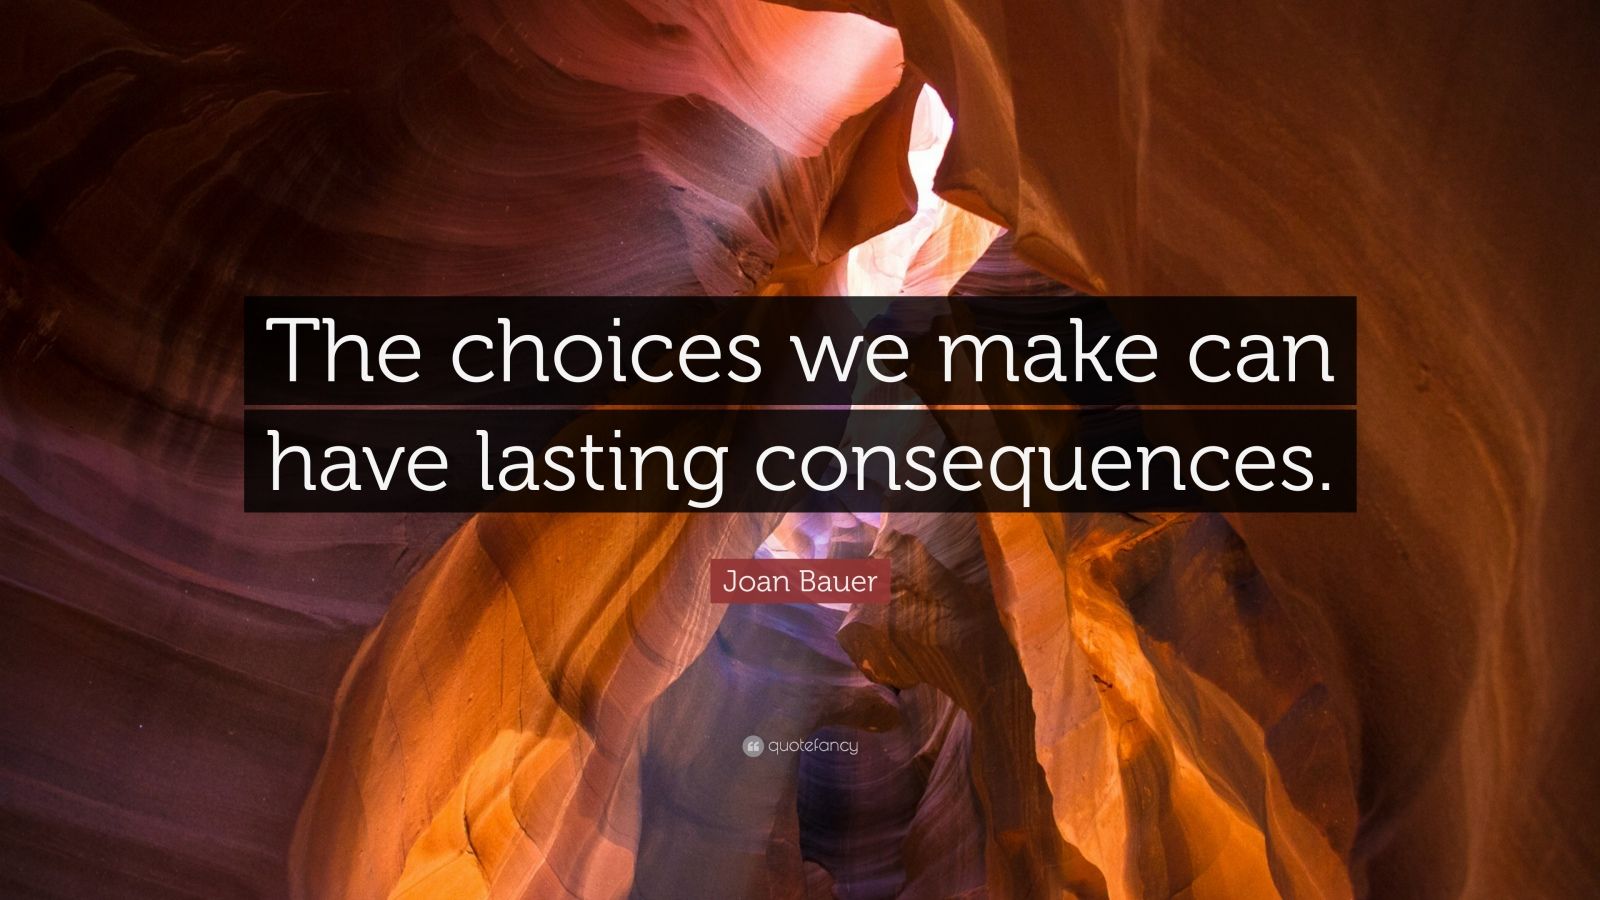 famous quotes about decisions and consequences